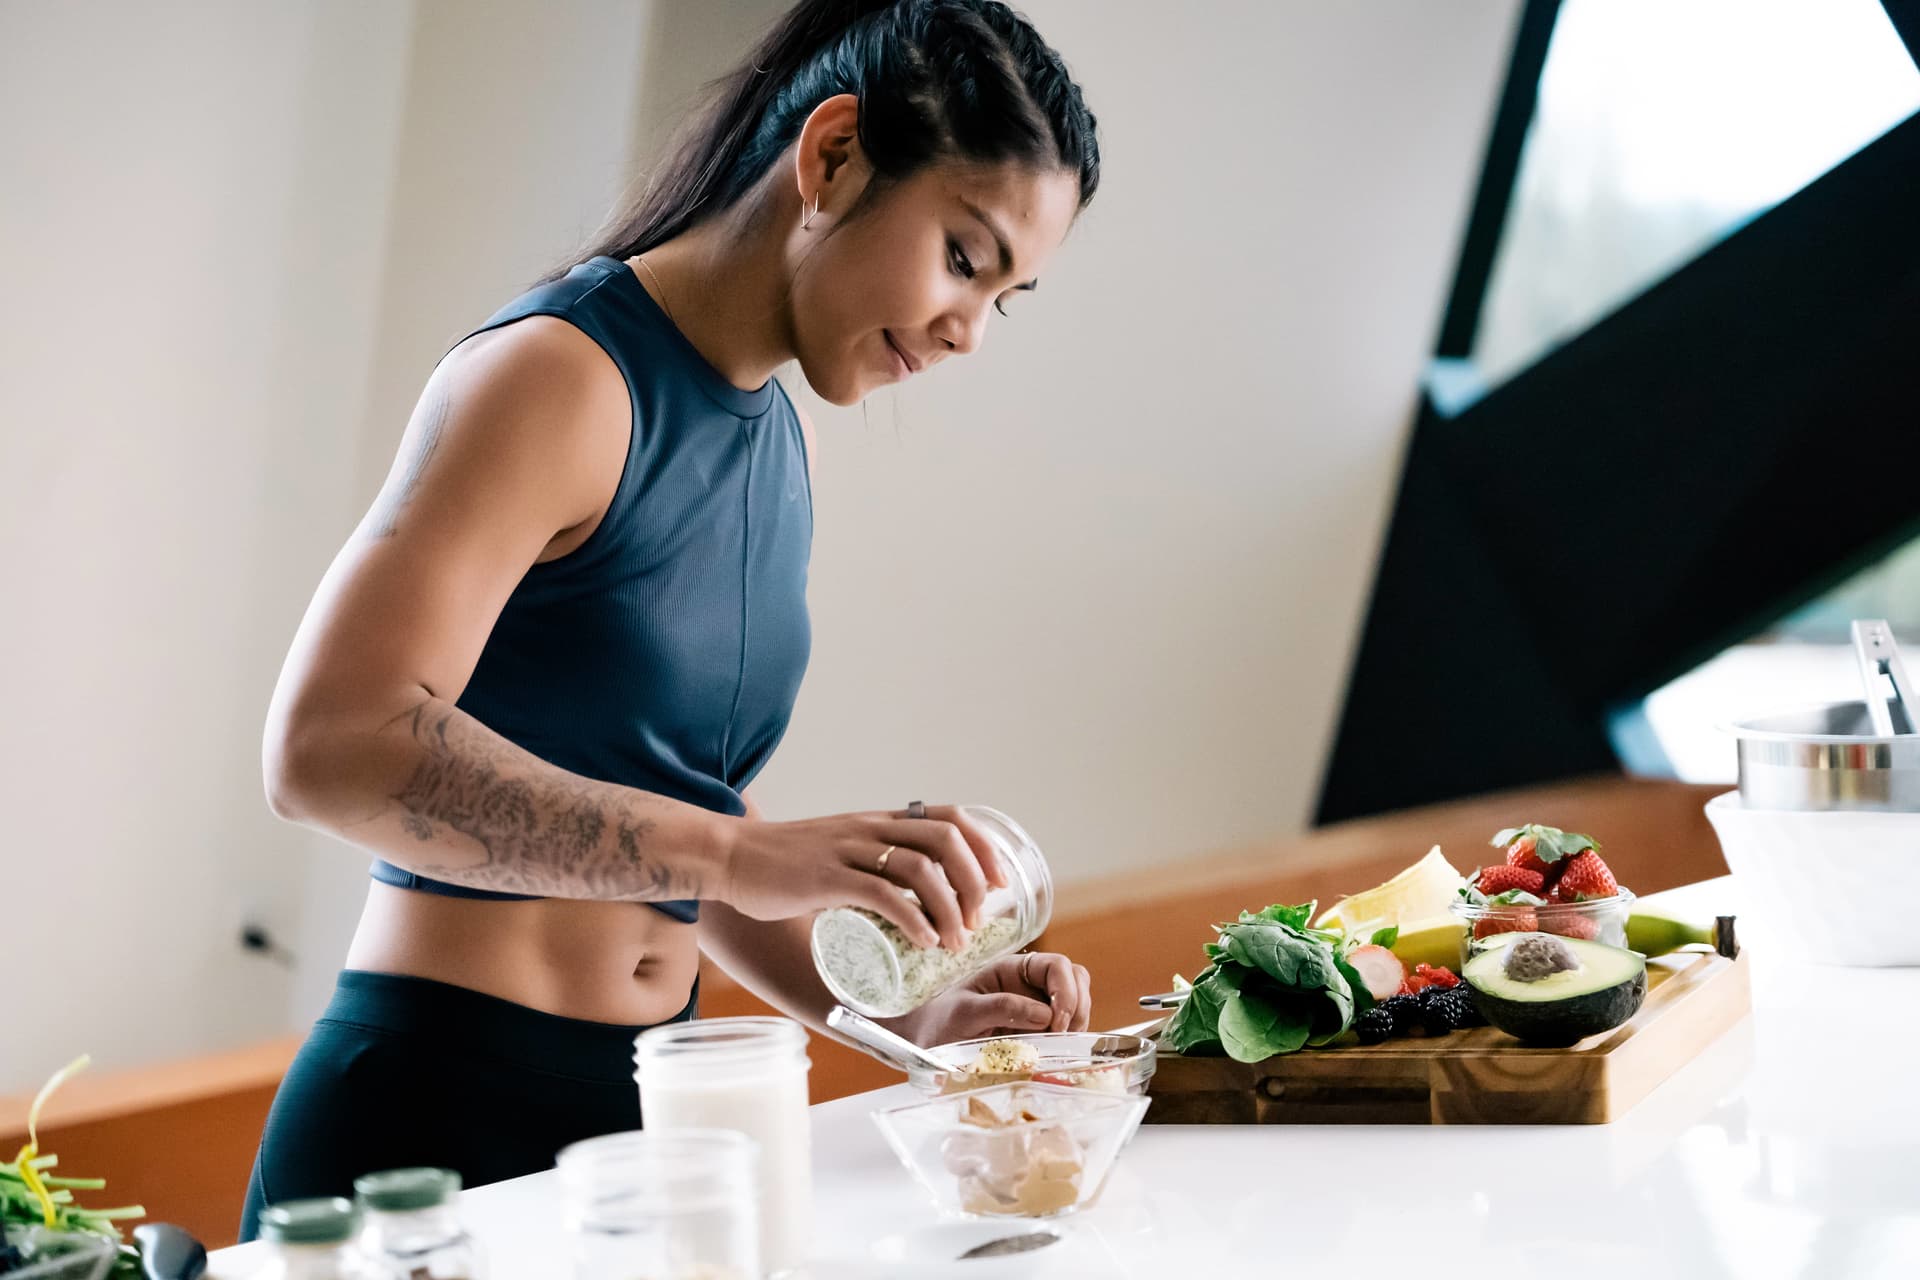 Eat These Foods Before Exercising, Says a Registered Dietitian